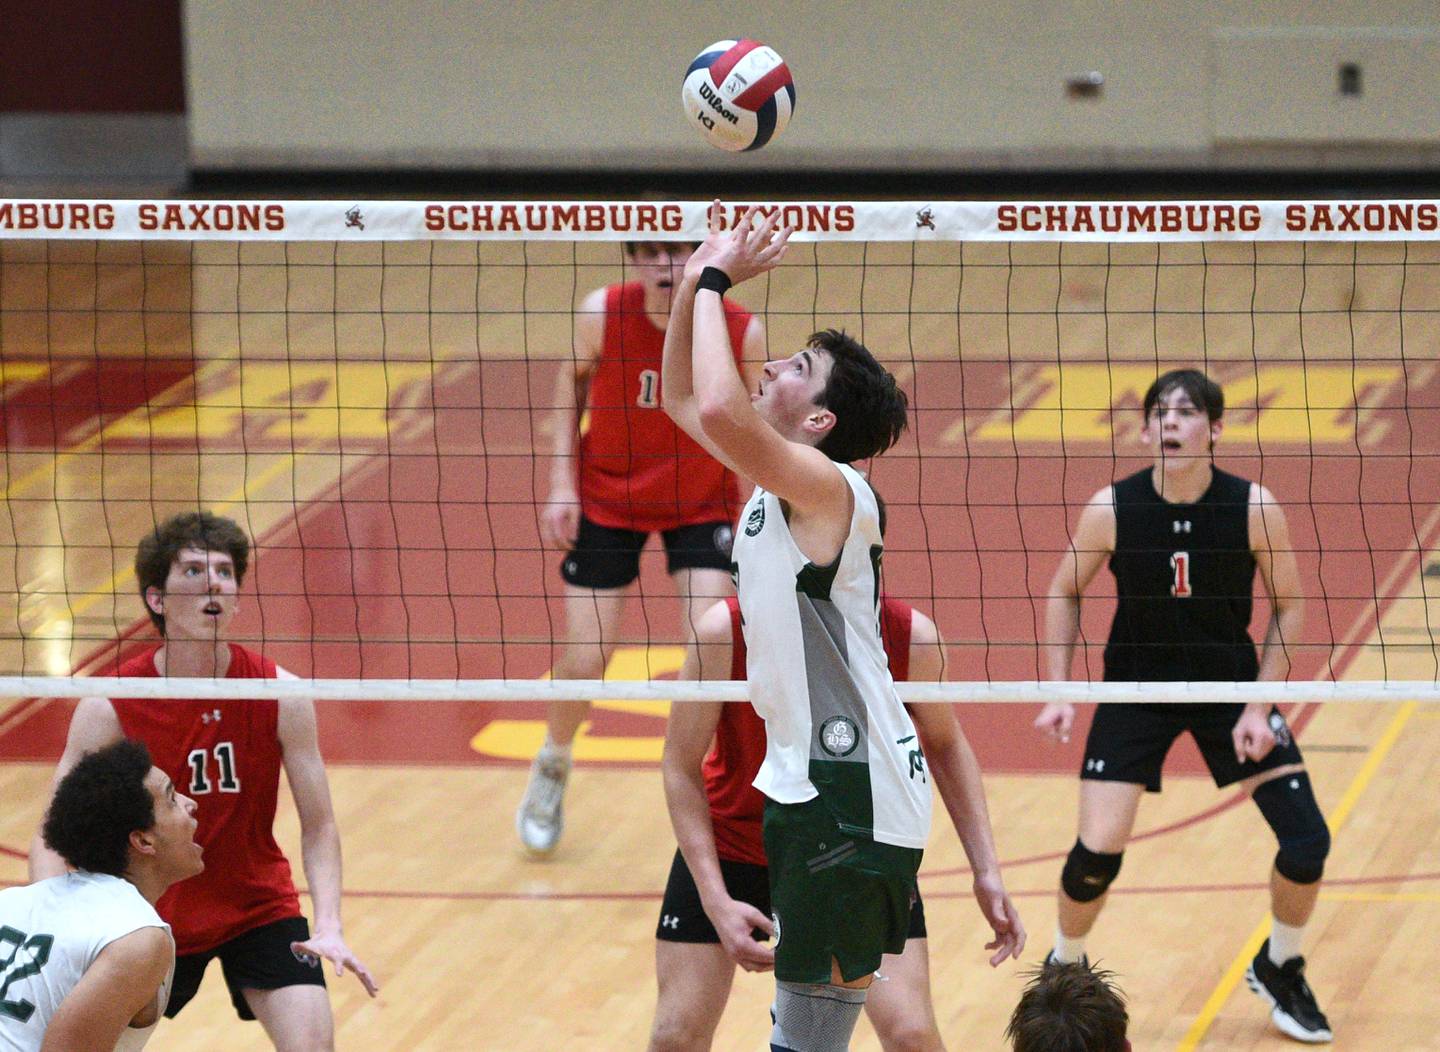 Glenbard West's Trevor Powell sets the ball during Tuesday's boys volleyball sectional championship match against Barrington in Schaumburg.